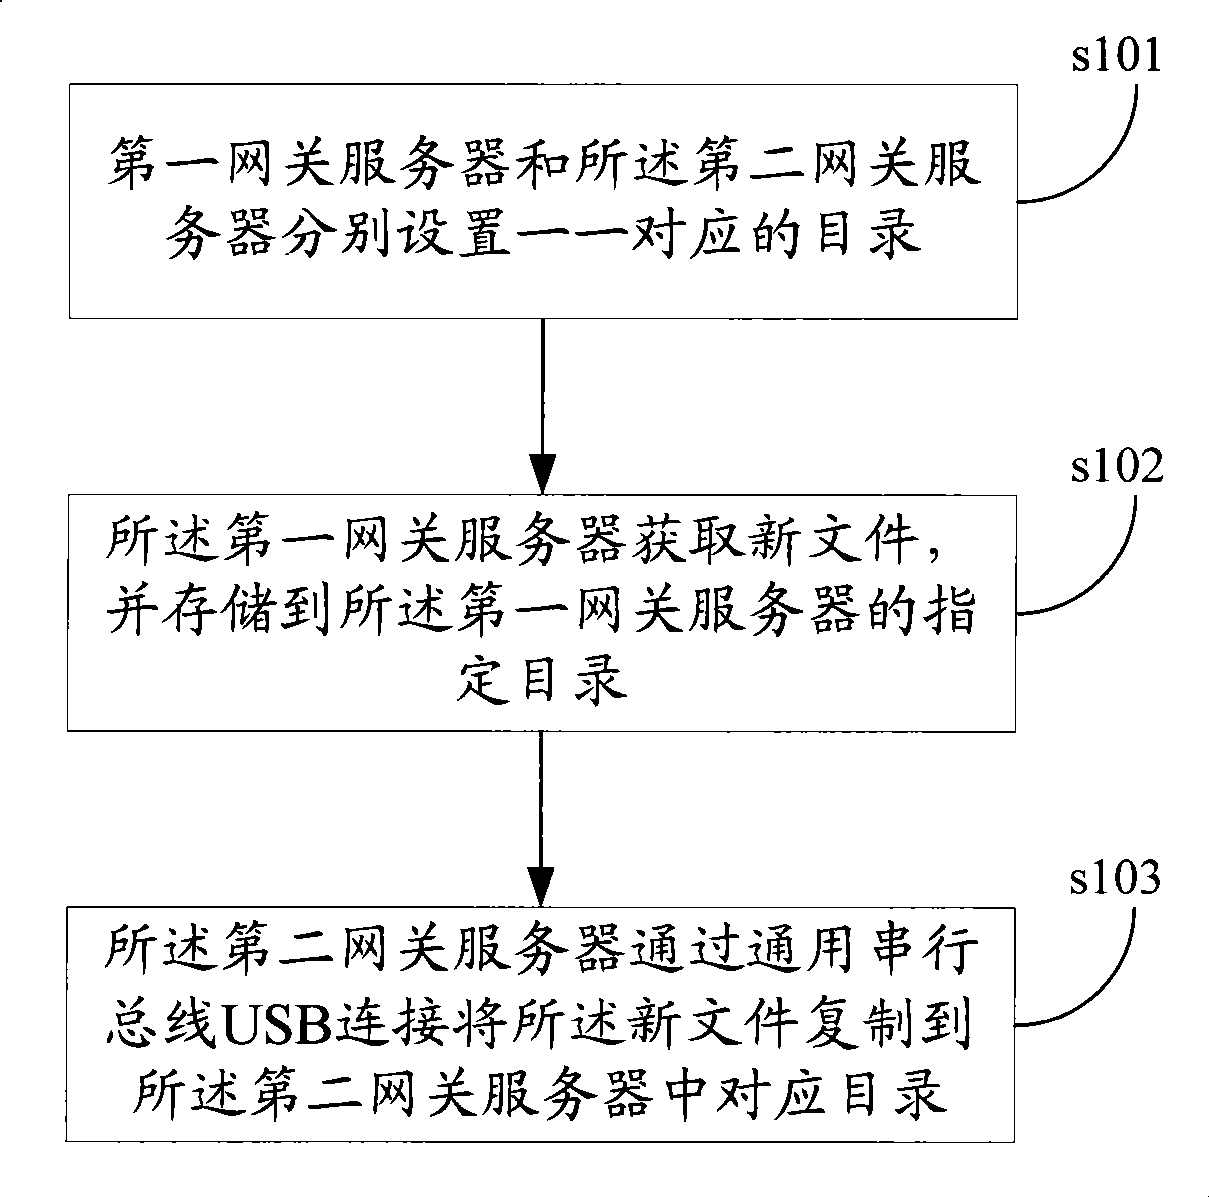 System for file interaction between networks